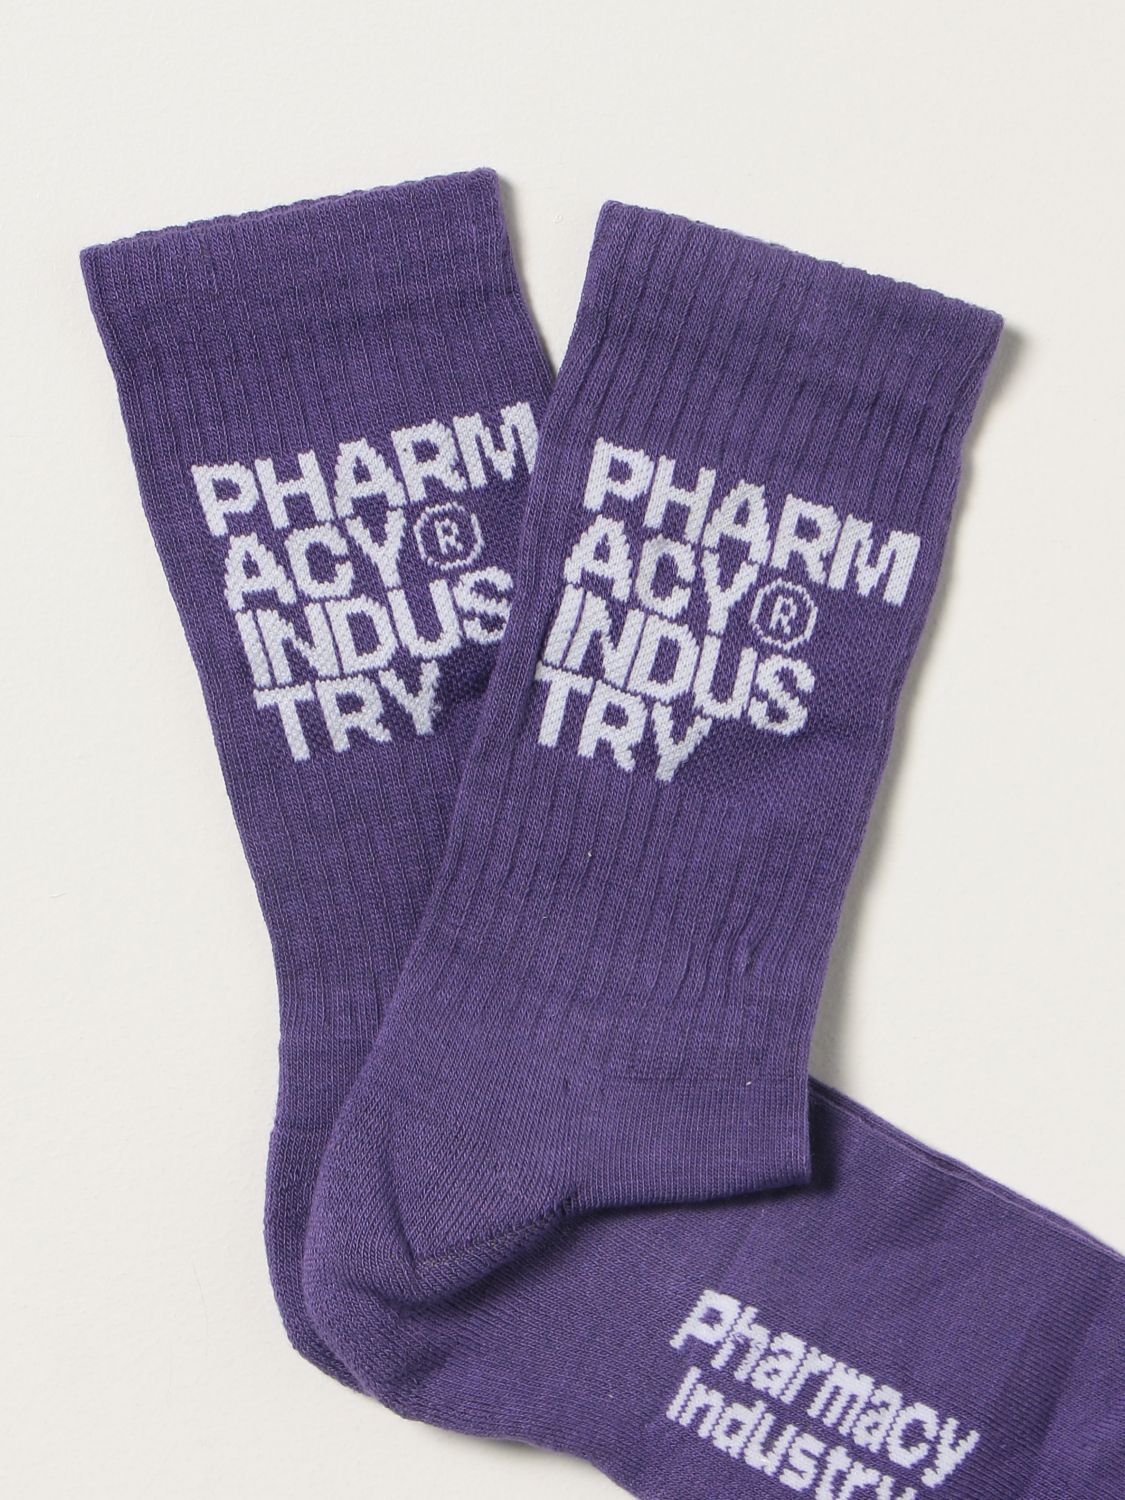 Chaussettes Pharmacy Industry: Chaussettes femme Pharmacy Industry violet 2